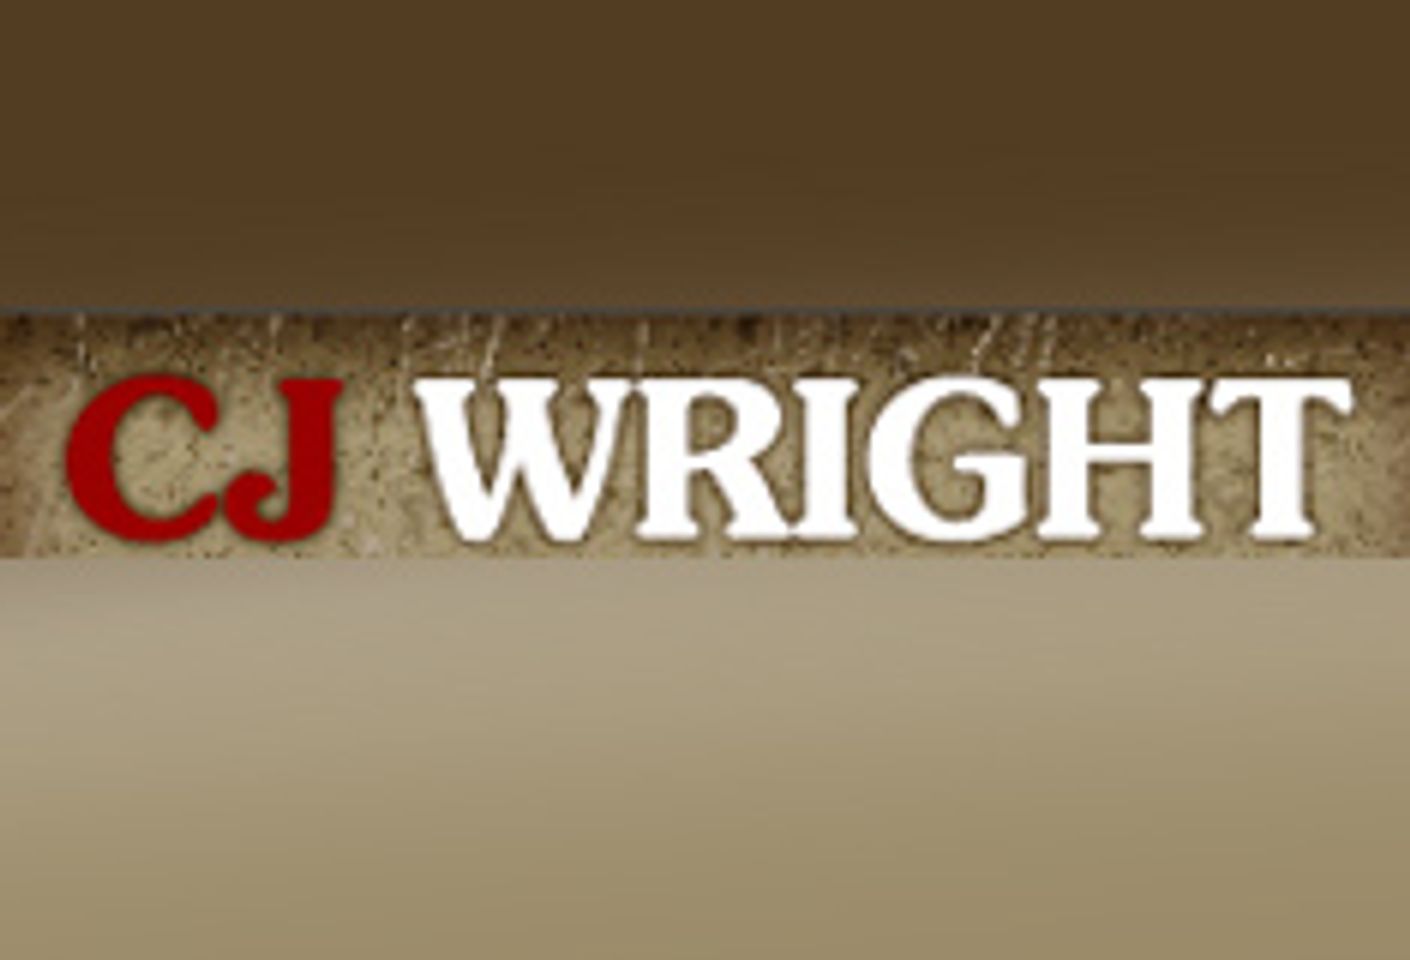 CJ Wright Makes the Best Even Better